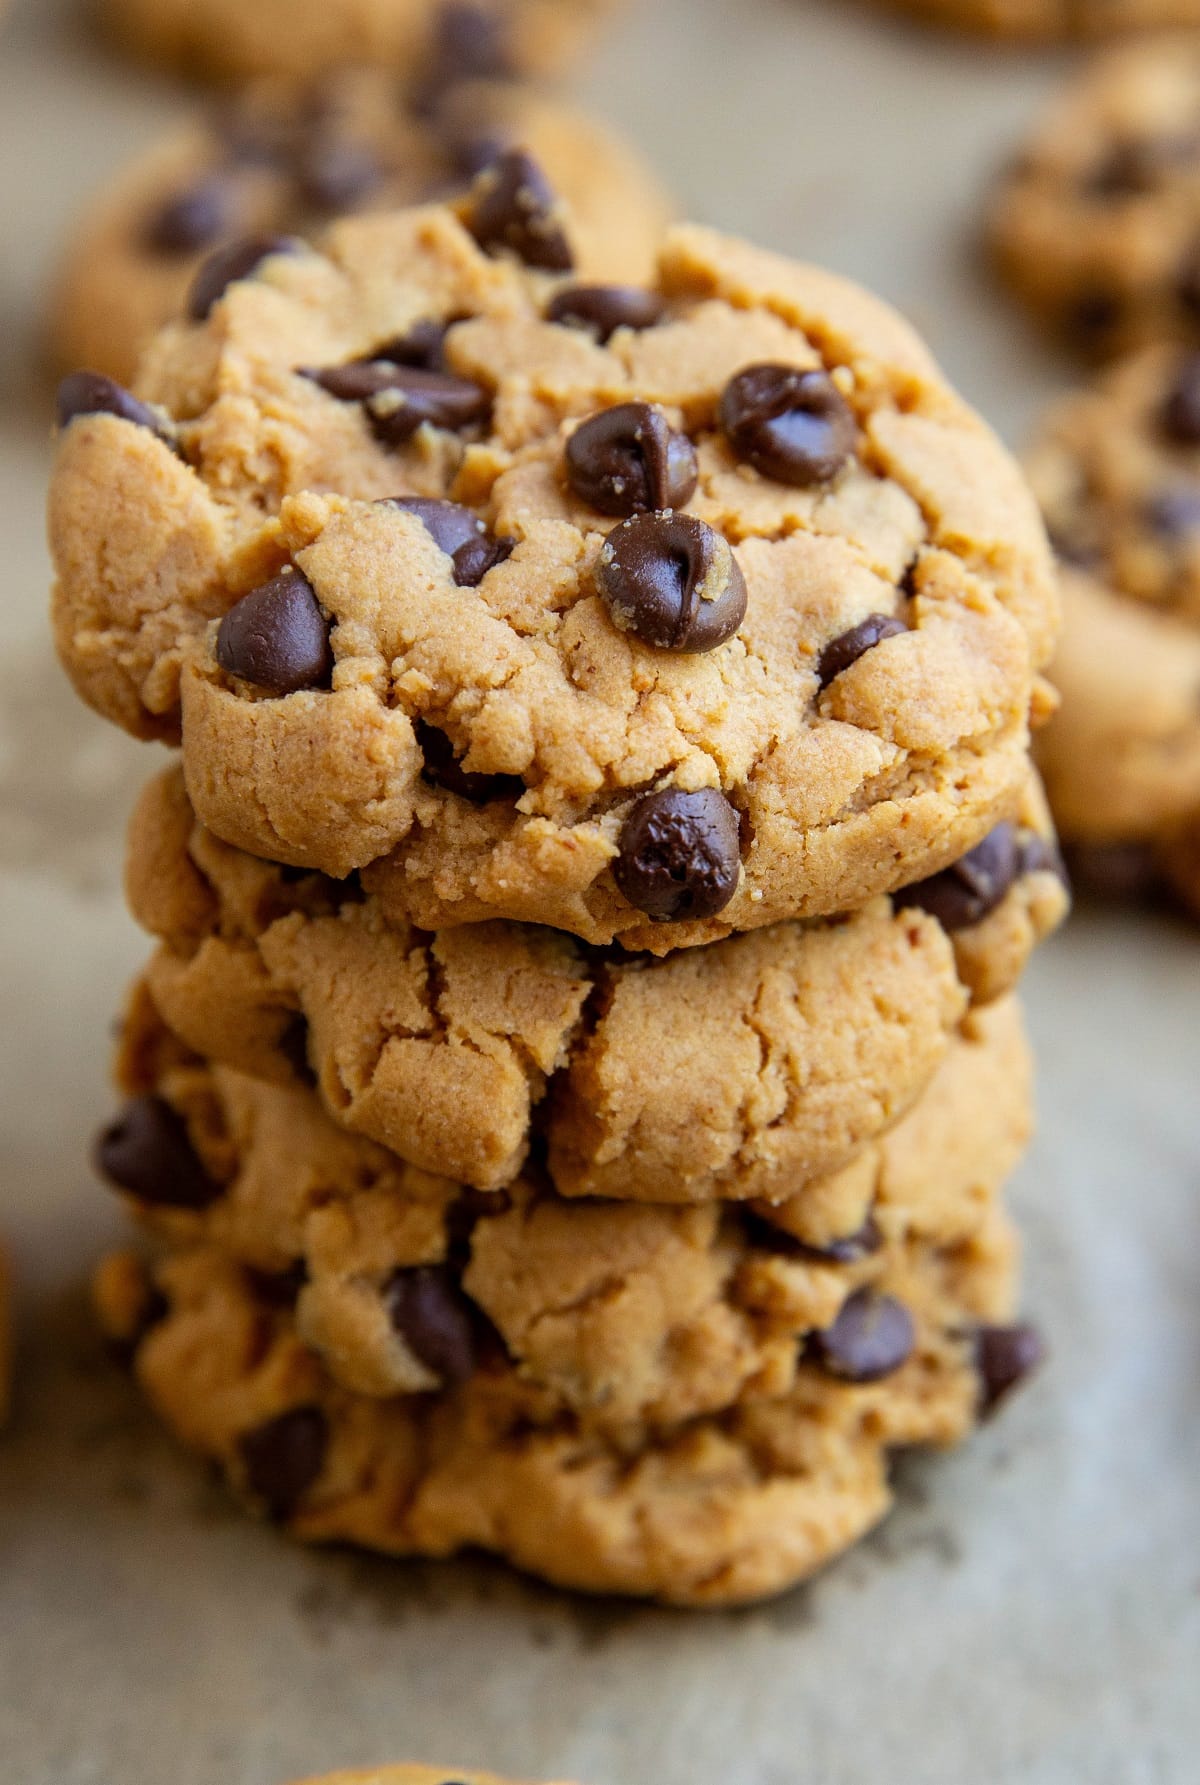 Stack of peanut butter chocolate chip cookies up close and personal.